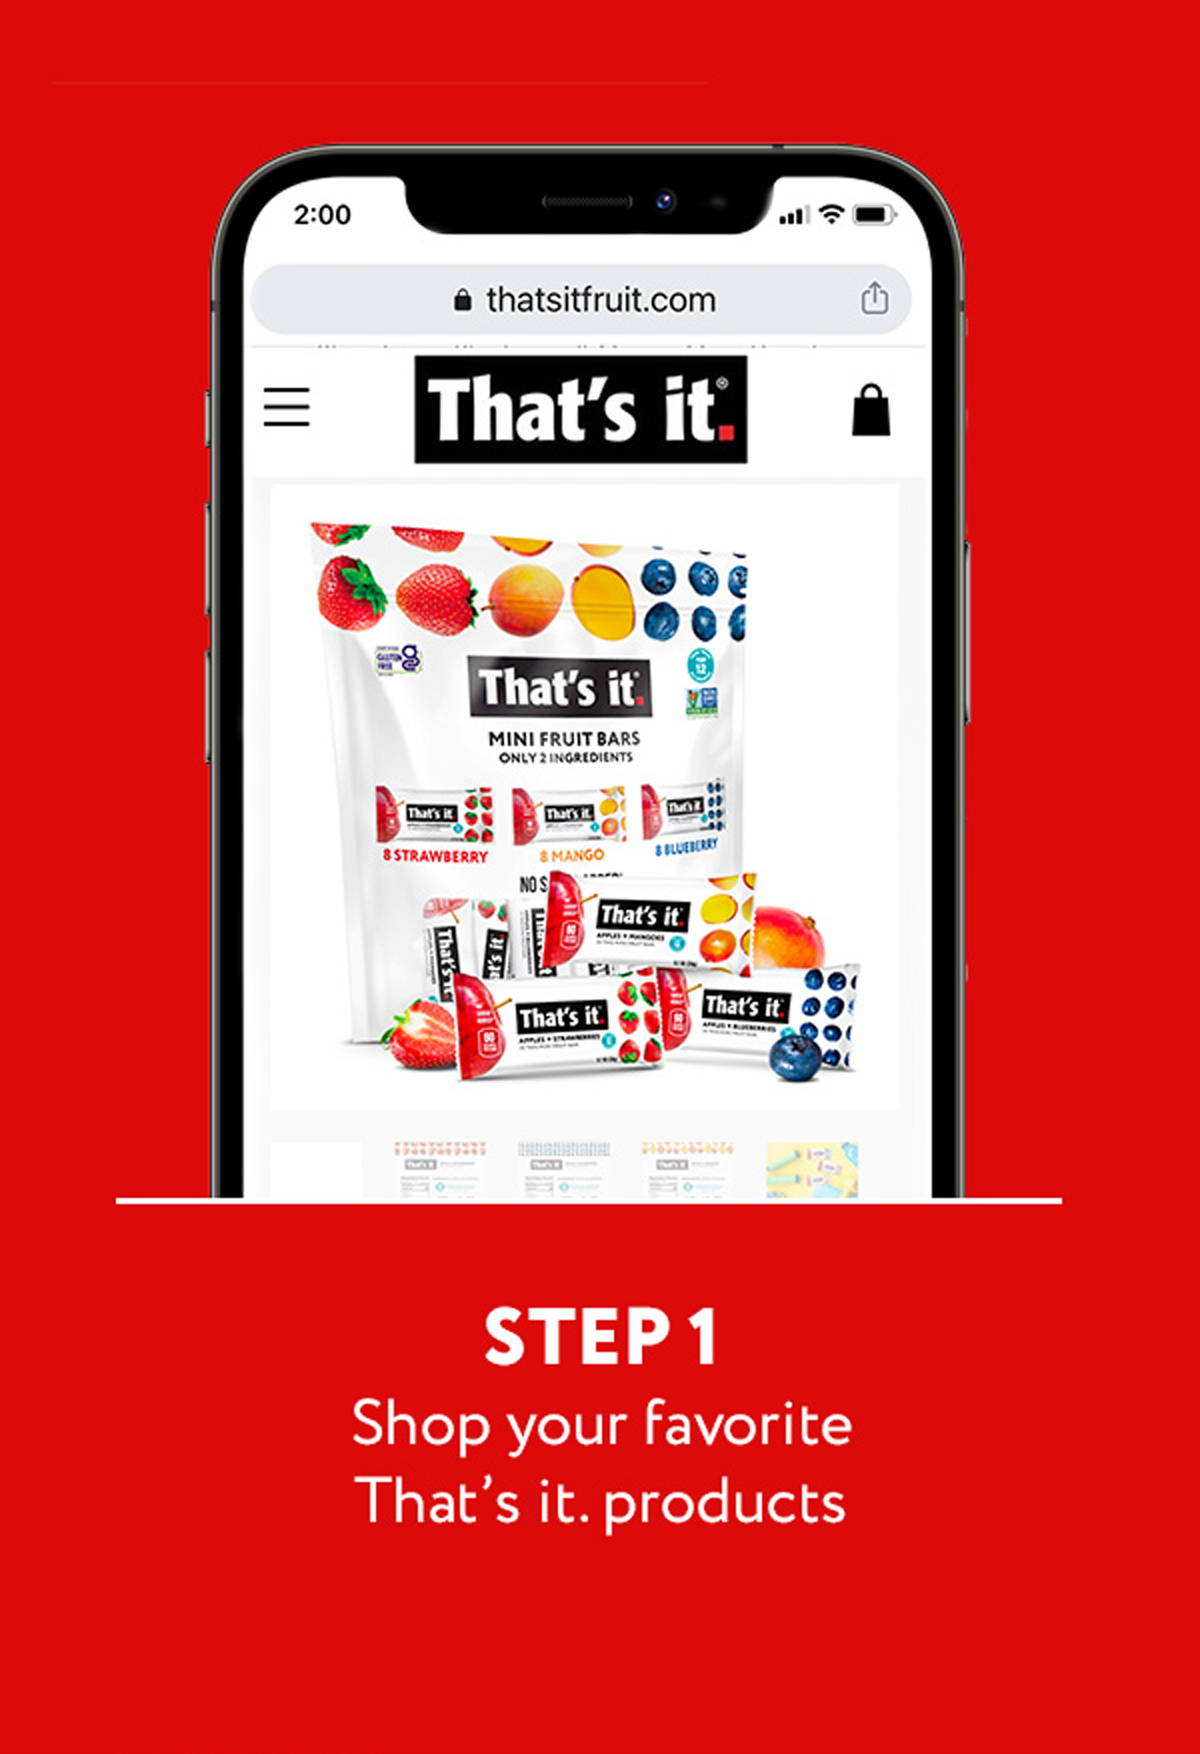 Step 1 - Shop your favorite That's it. products